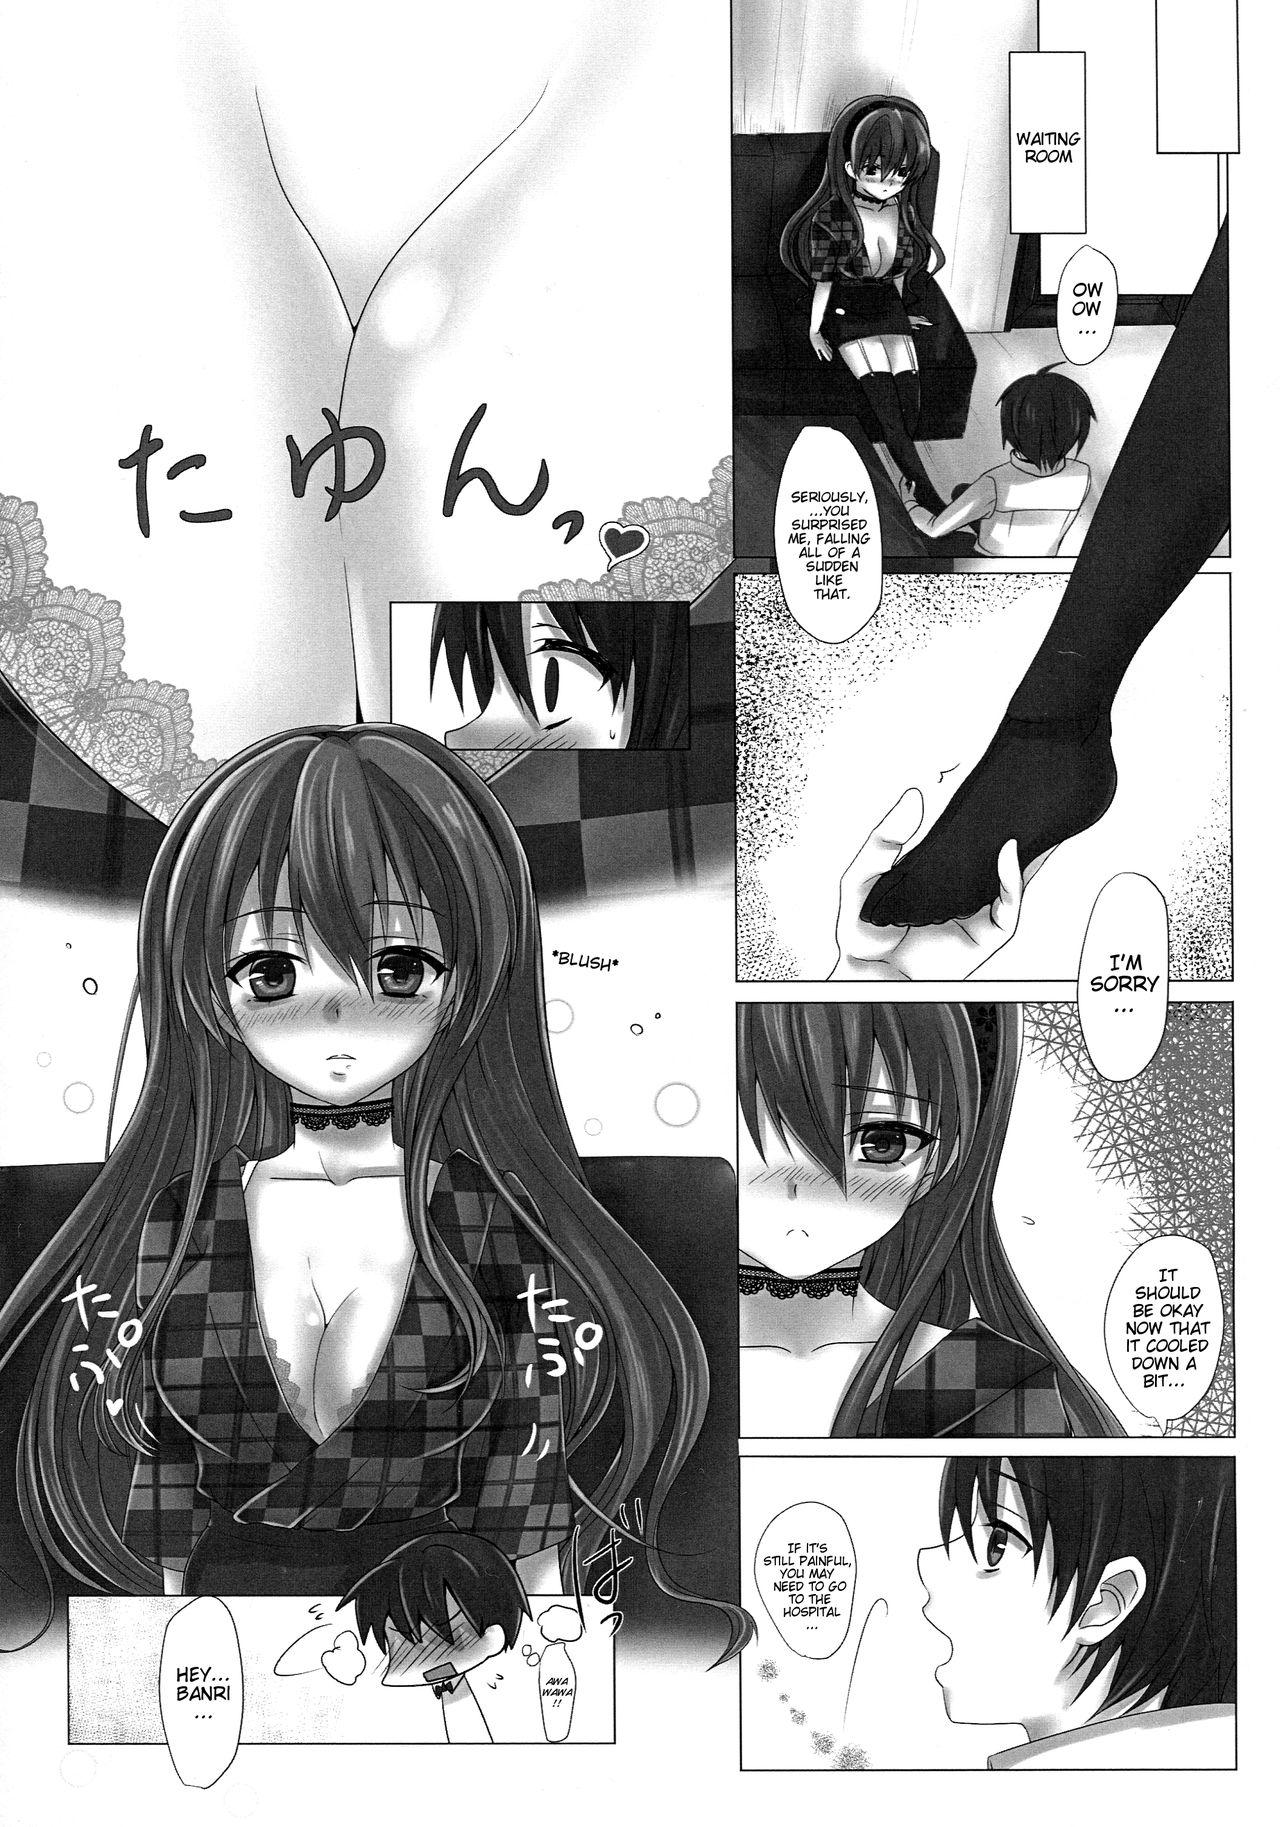 Camera KISS ME TOUCH ME - Golden time Off - Page 4